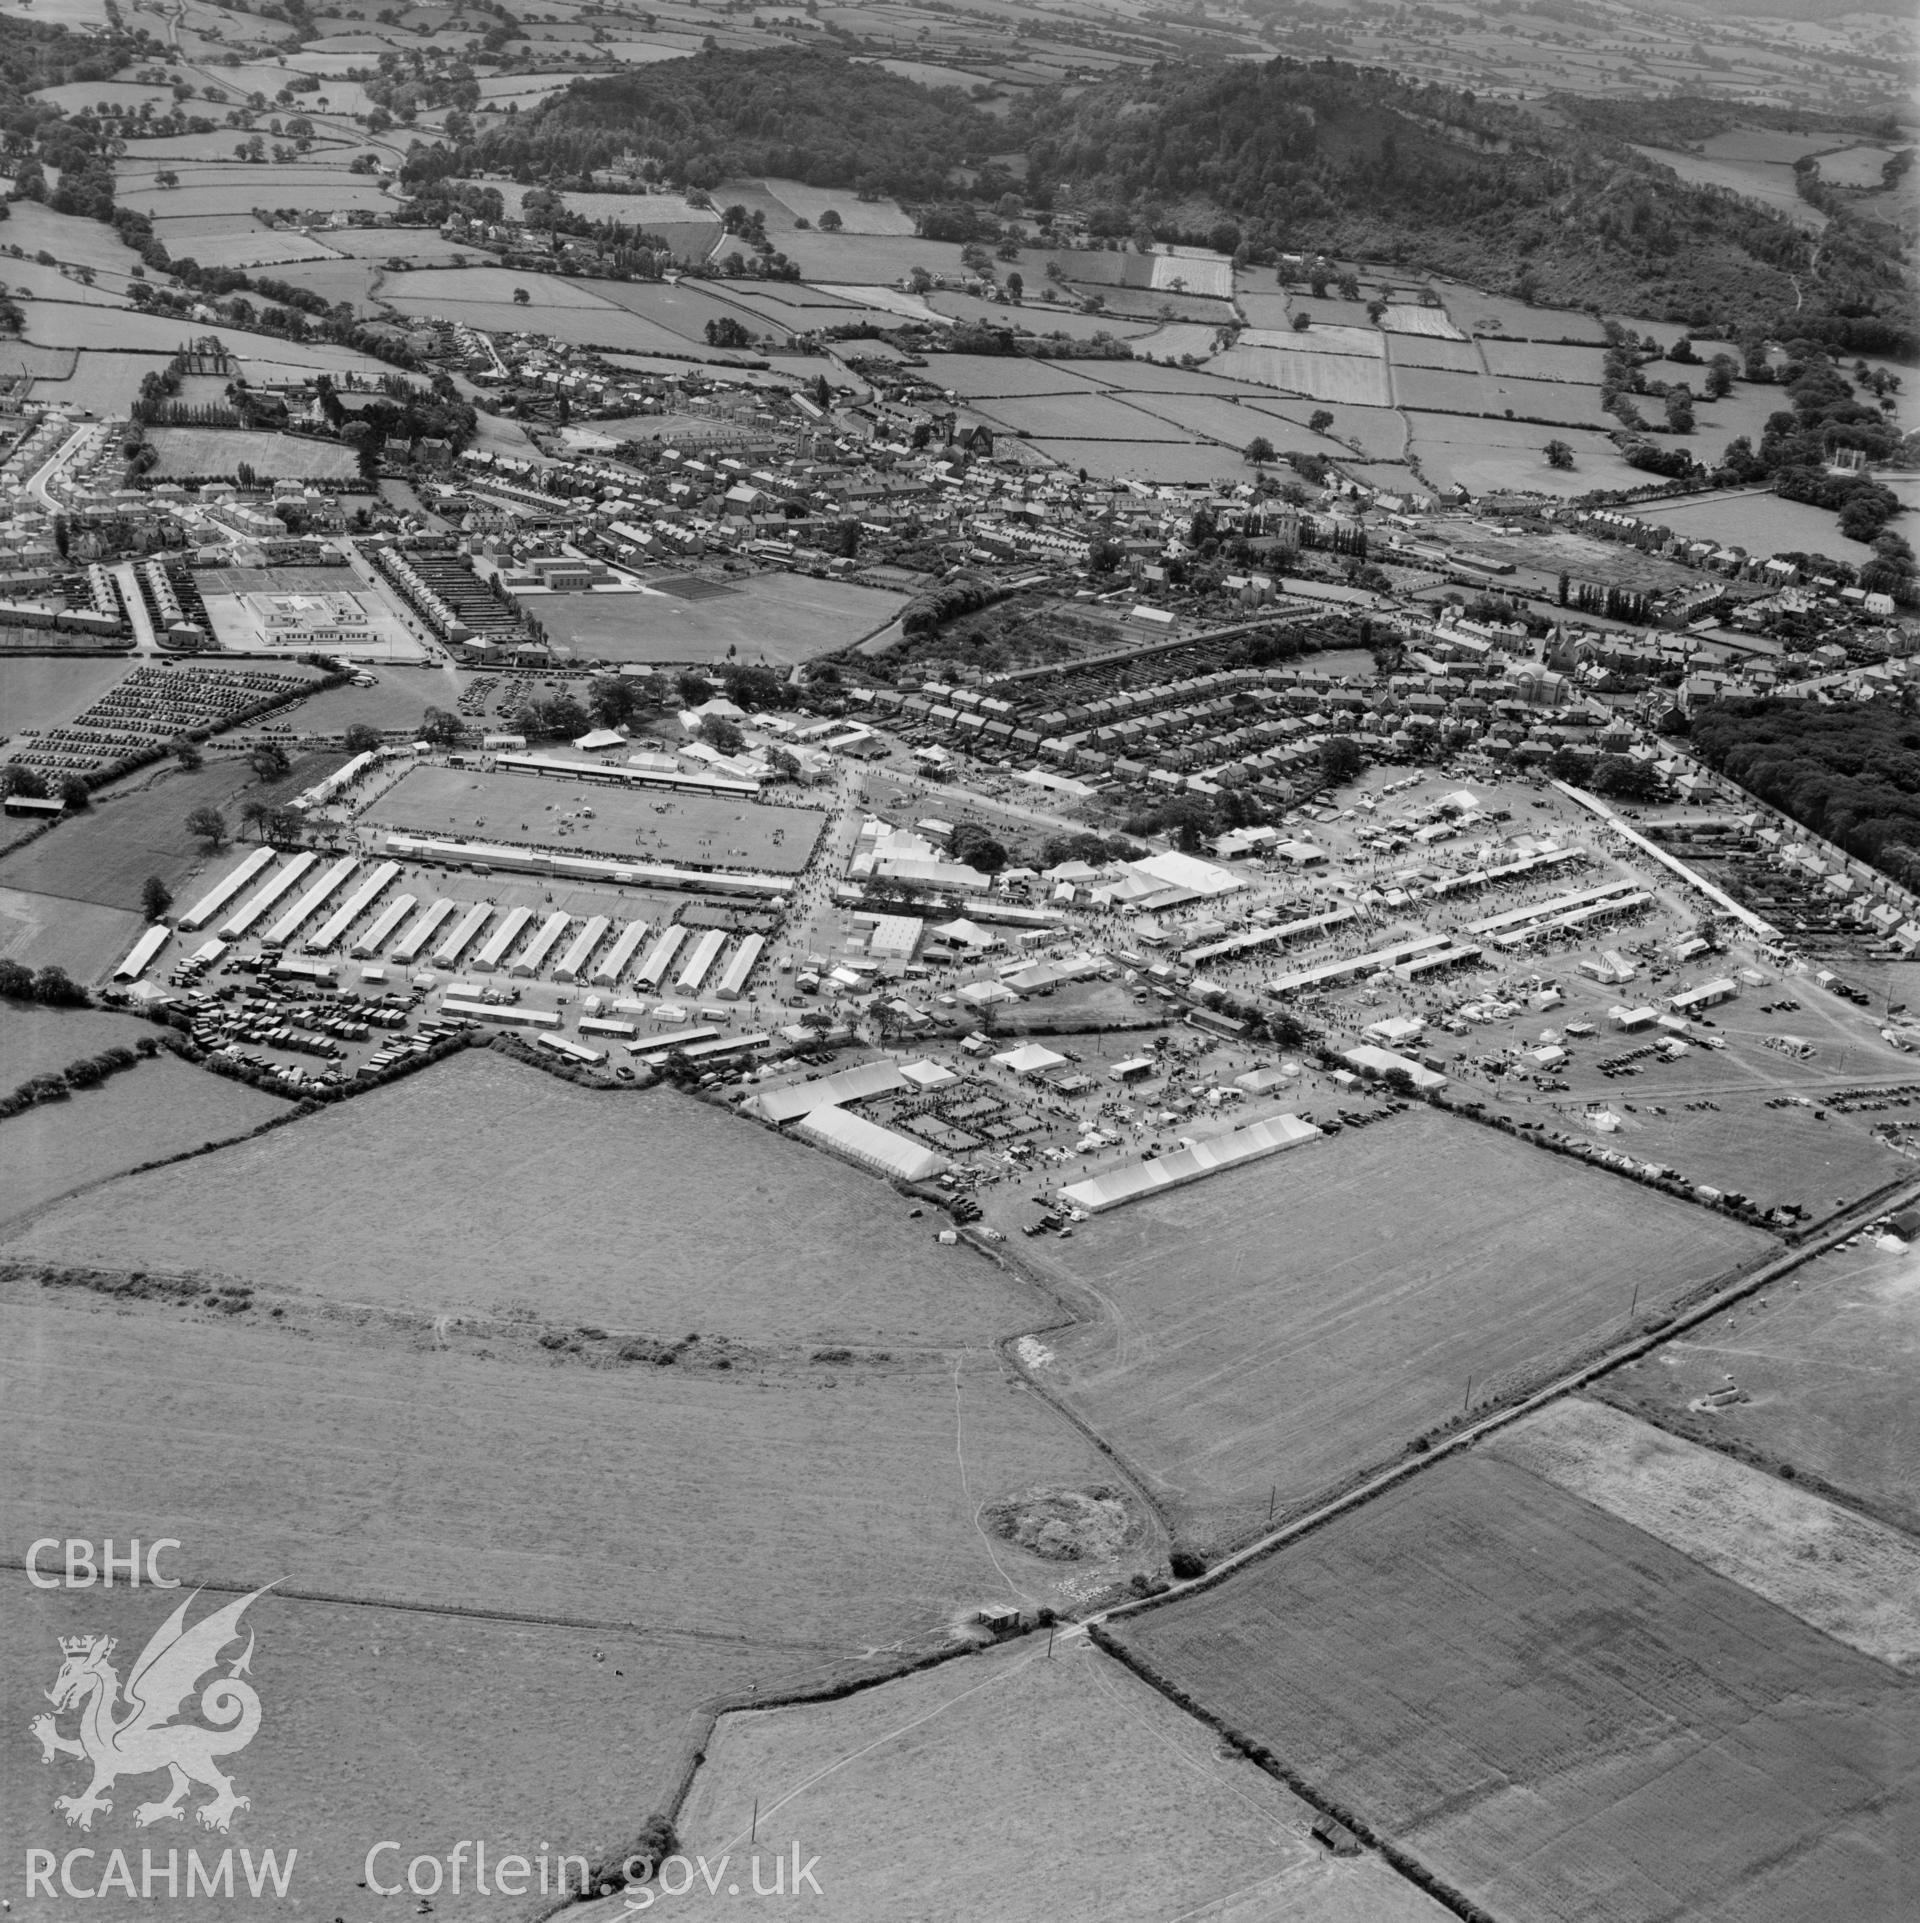 View of Royal Welsh show at Abergele, July 1950